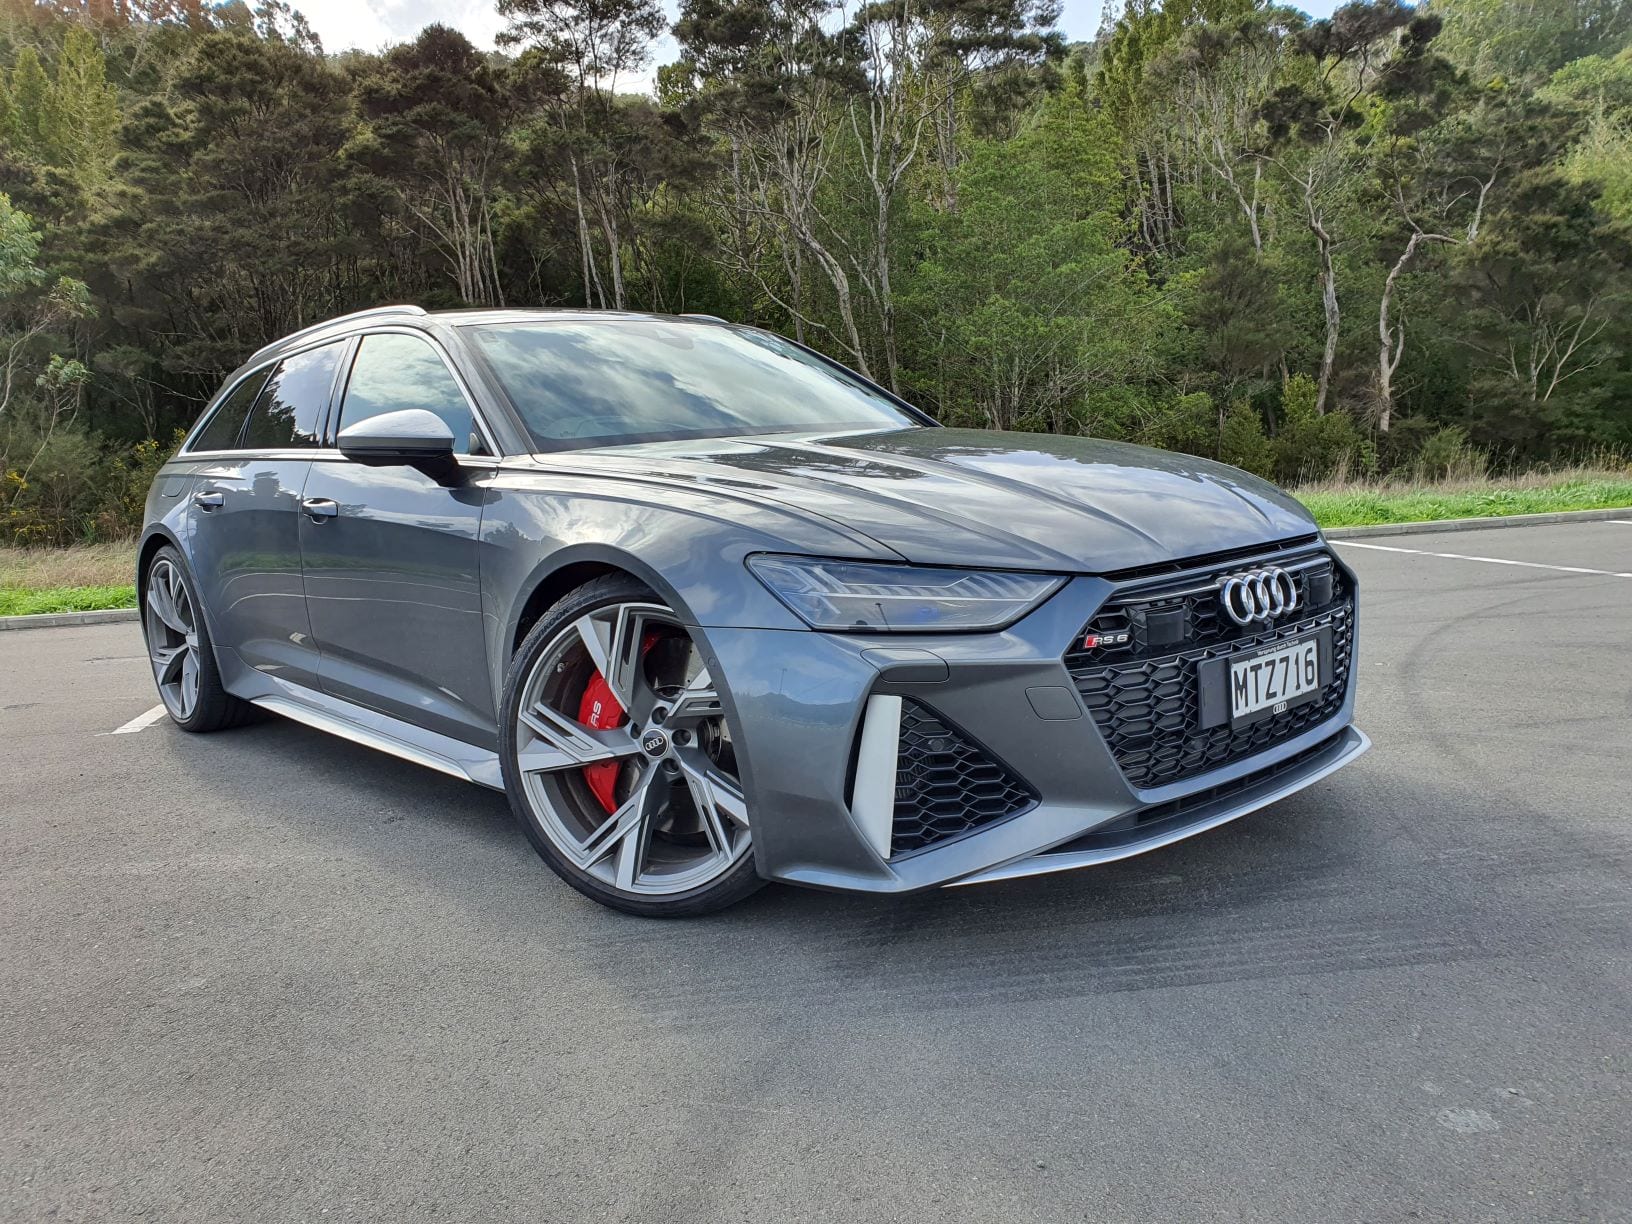 A front view of the Audi RS6